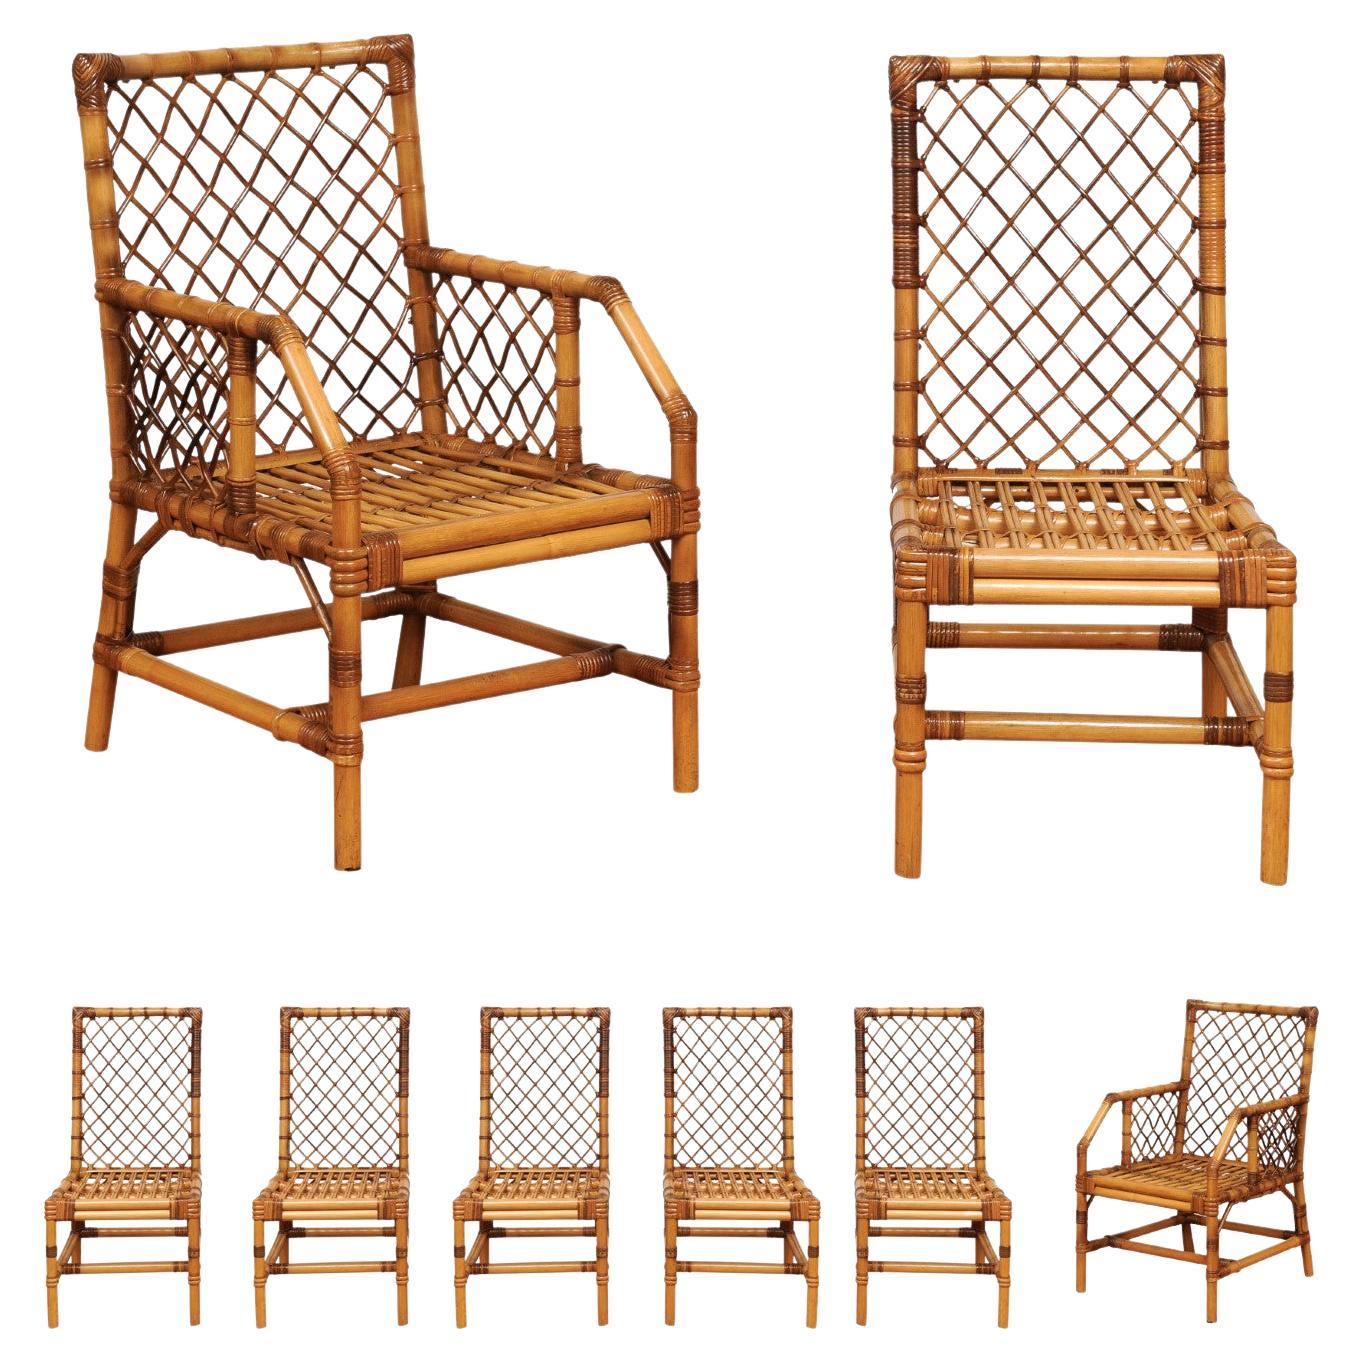 Stellar Set of 8 Rattan and Cane Dining Chairs by Bielecky Brothers, circa 1975 For Sale